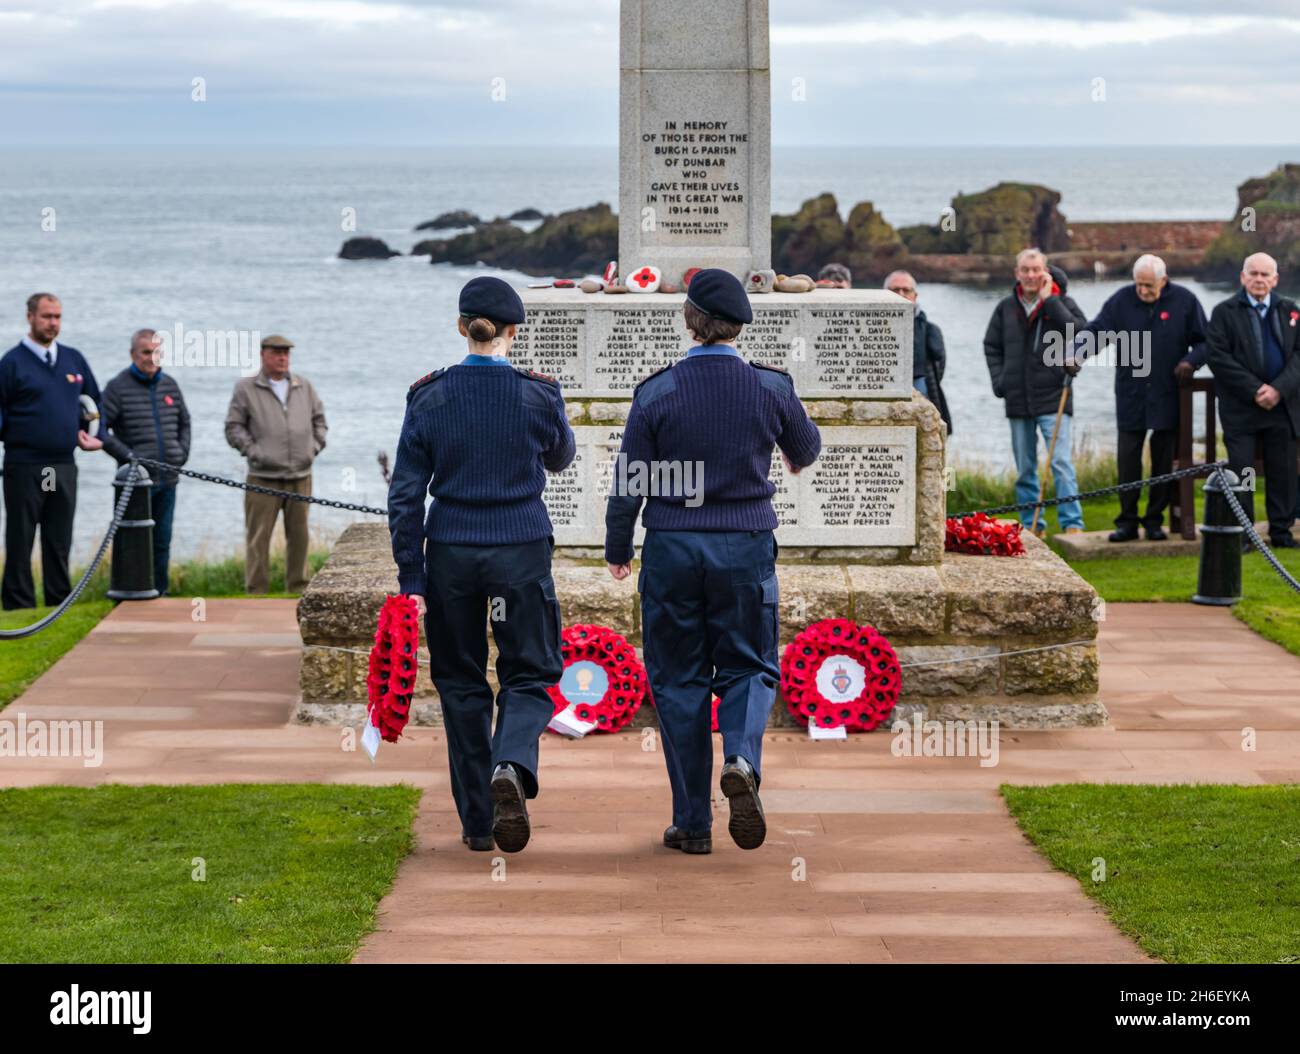 Cadets laying poppy wreath at war memorial in Remembrance Day ceremony, Dunbar, East Lothian, Scotland, UK Stock Photo